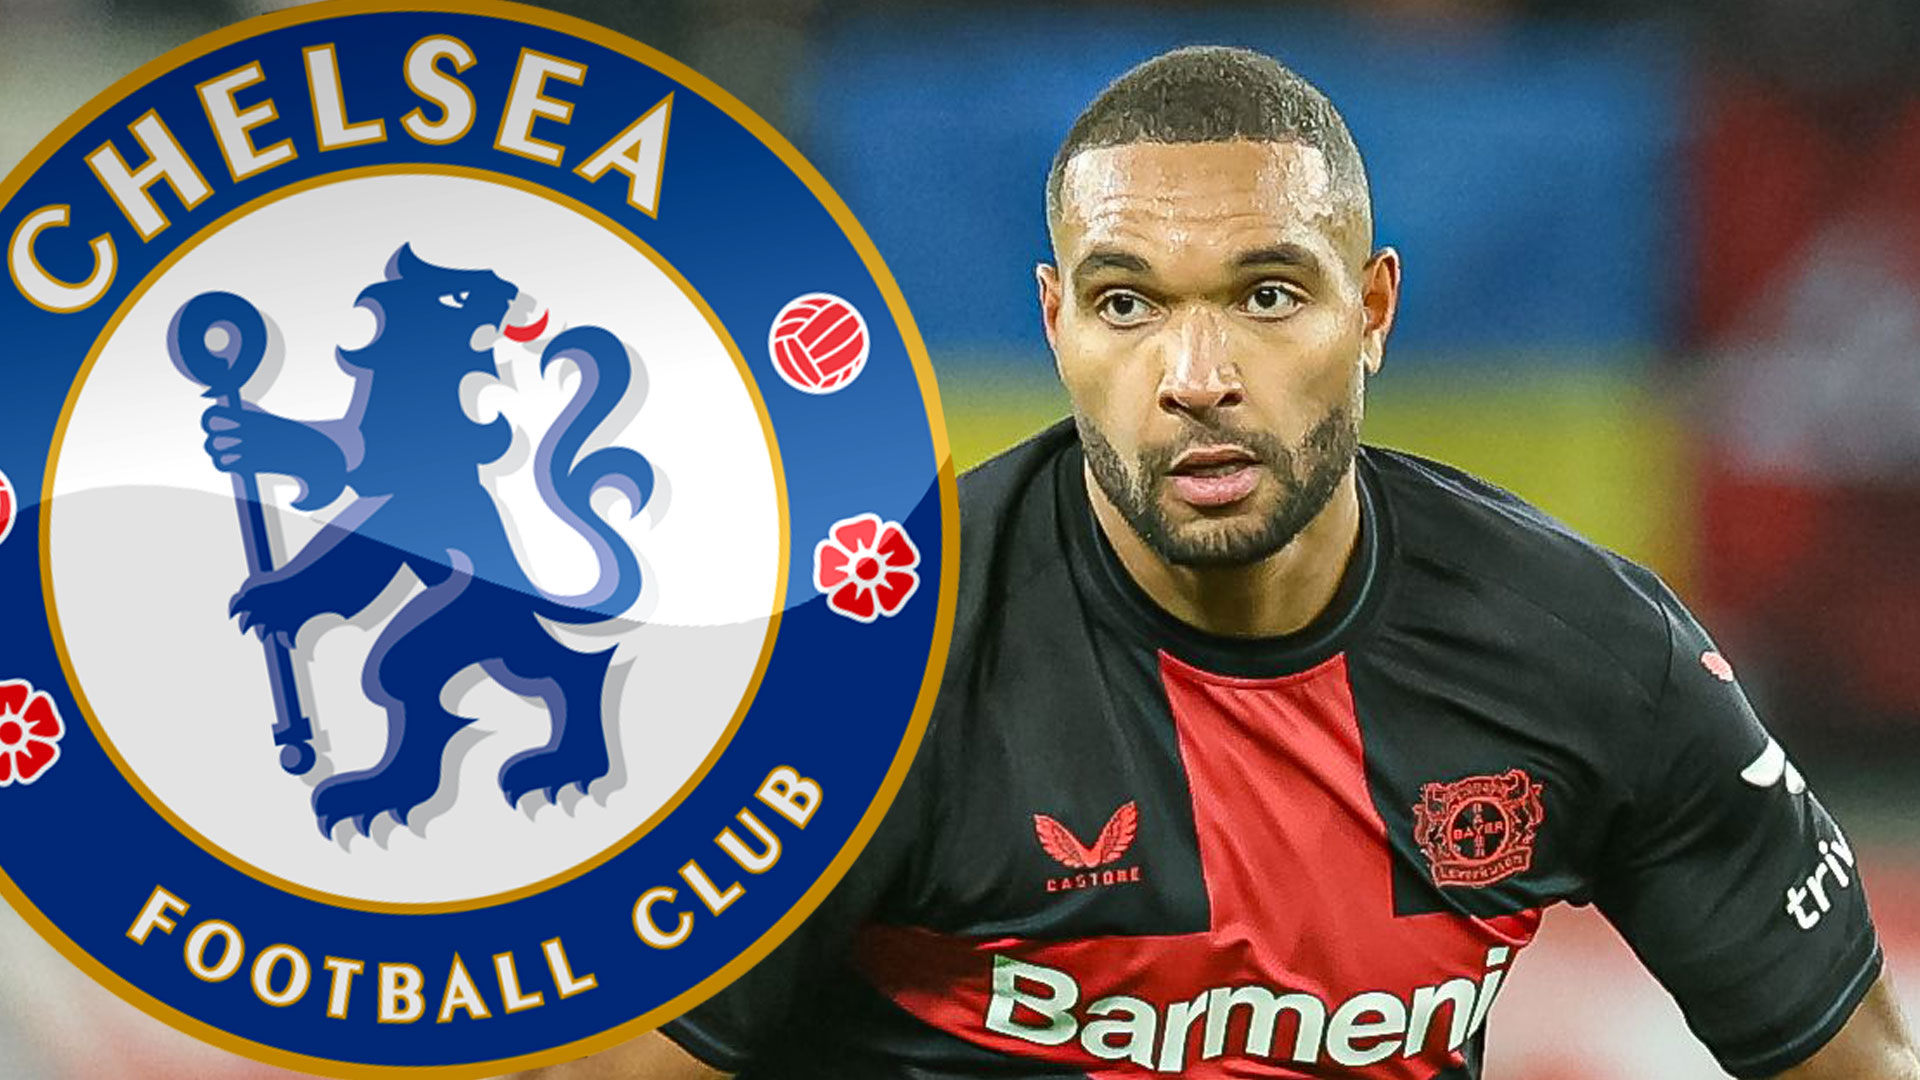 Chelsea in transfer race with Man Utd and Spurs for Germany's Jonathan Tah but will be made to wait by Bayer Leverkusen